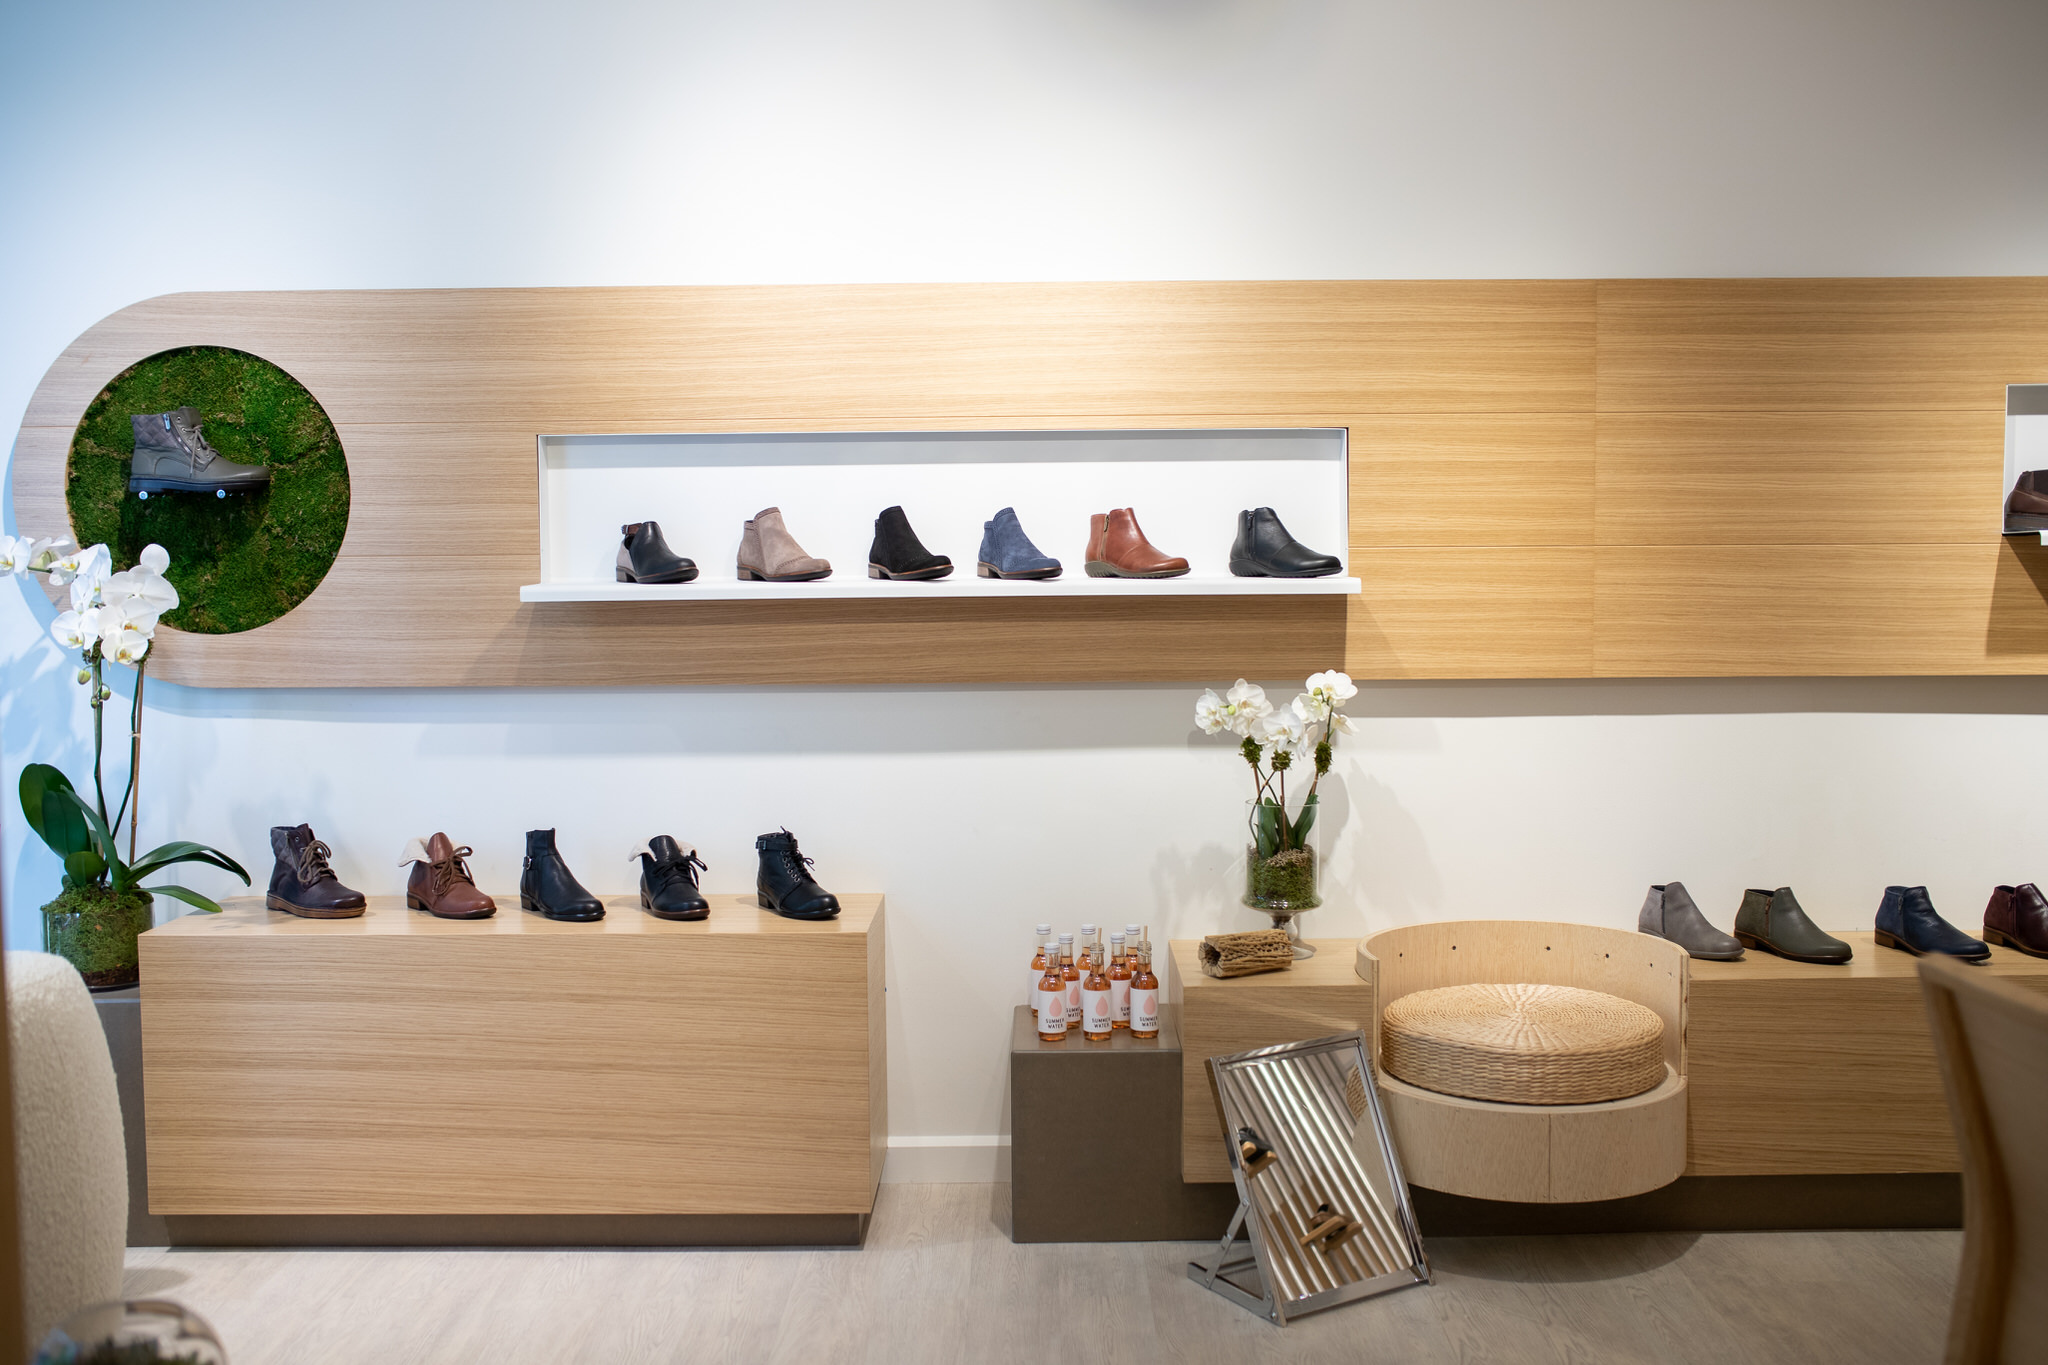 Image shows shoes and boots beautifully displayed on floating store shelves